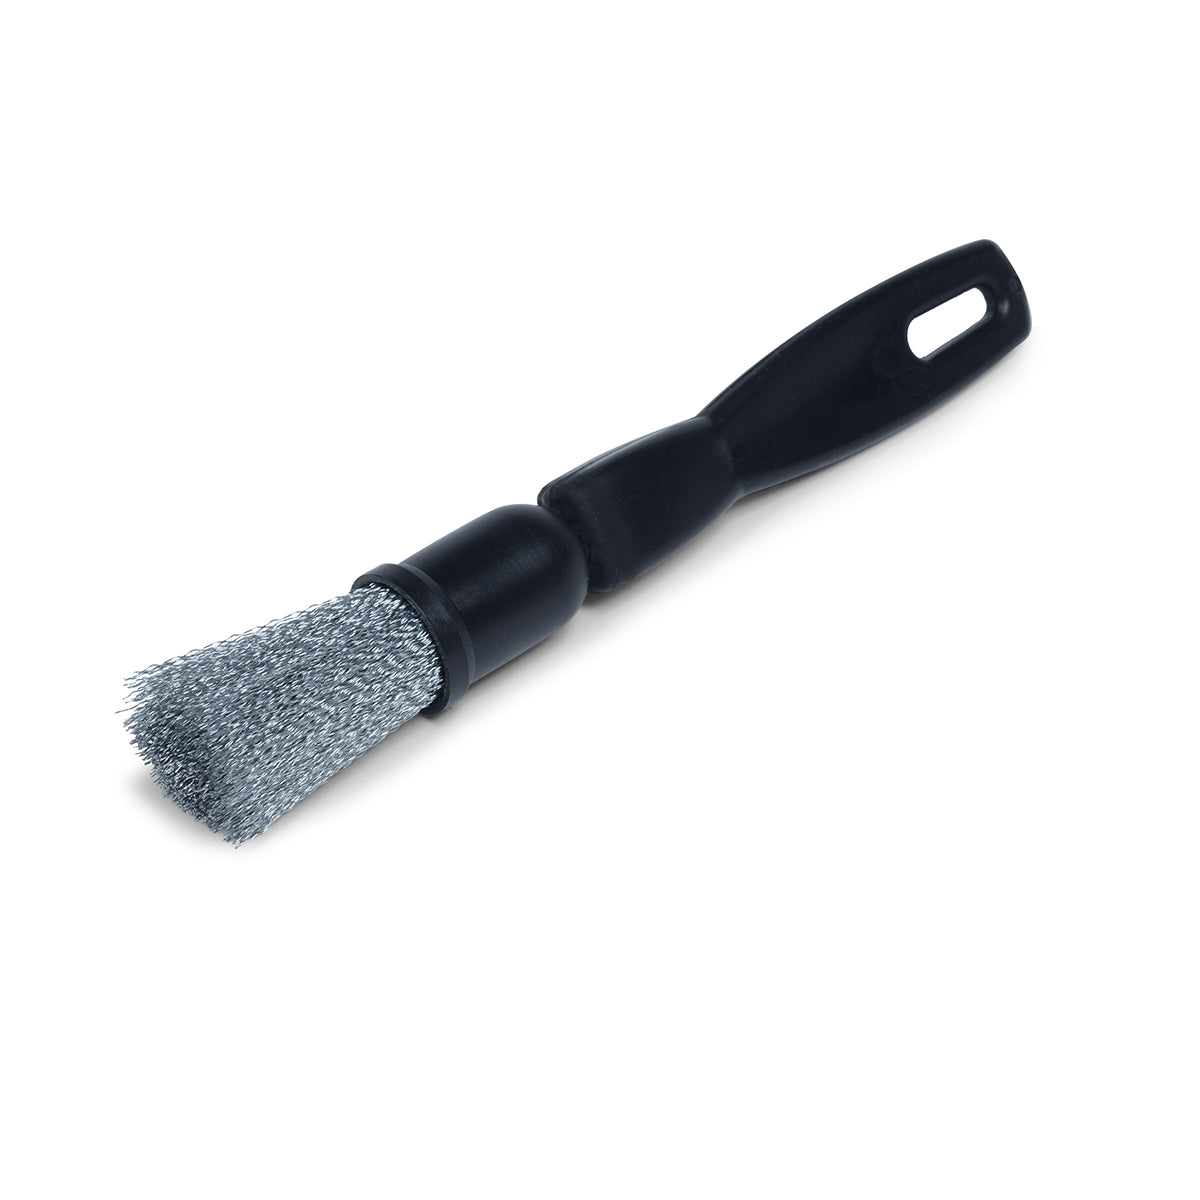 Heavy Duty Parts Cleaning Brush | Brushtech Brushes Inc. - America's #1 Source for All Specialty and Hard-to-Find Brushes - Buy Direct and SAVE!